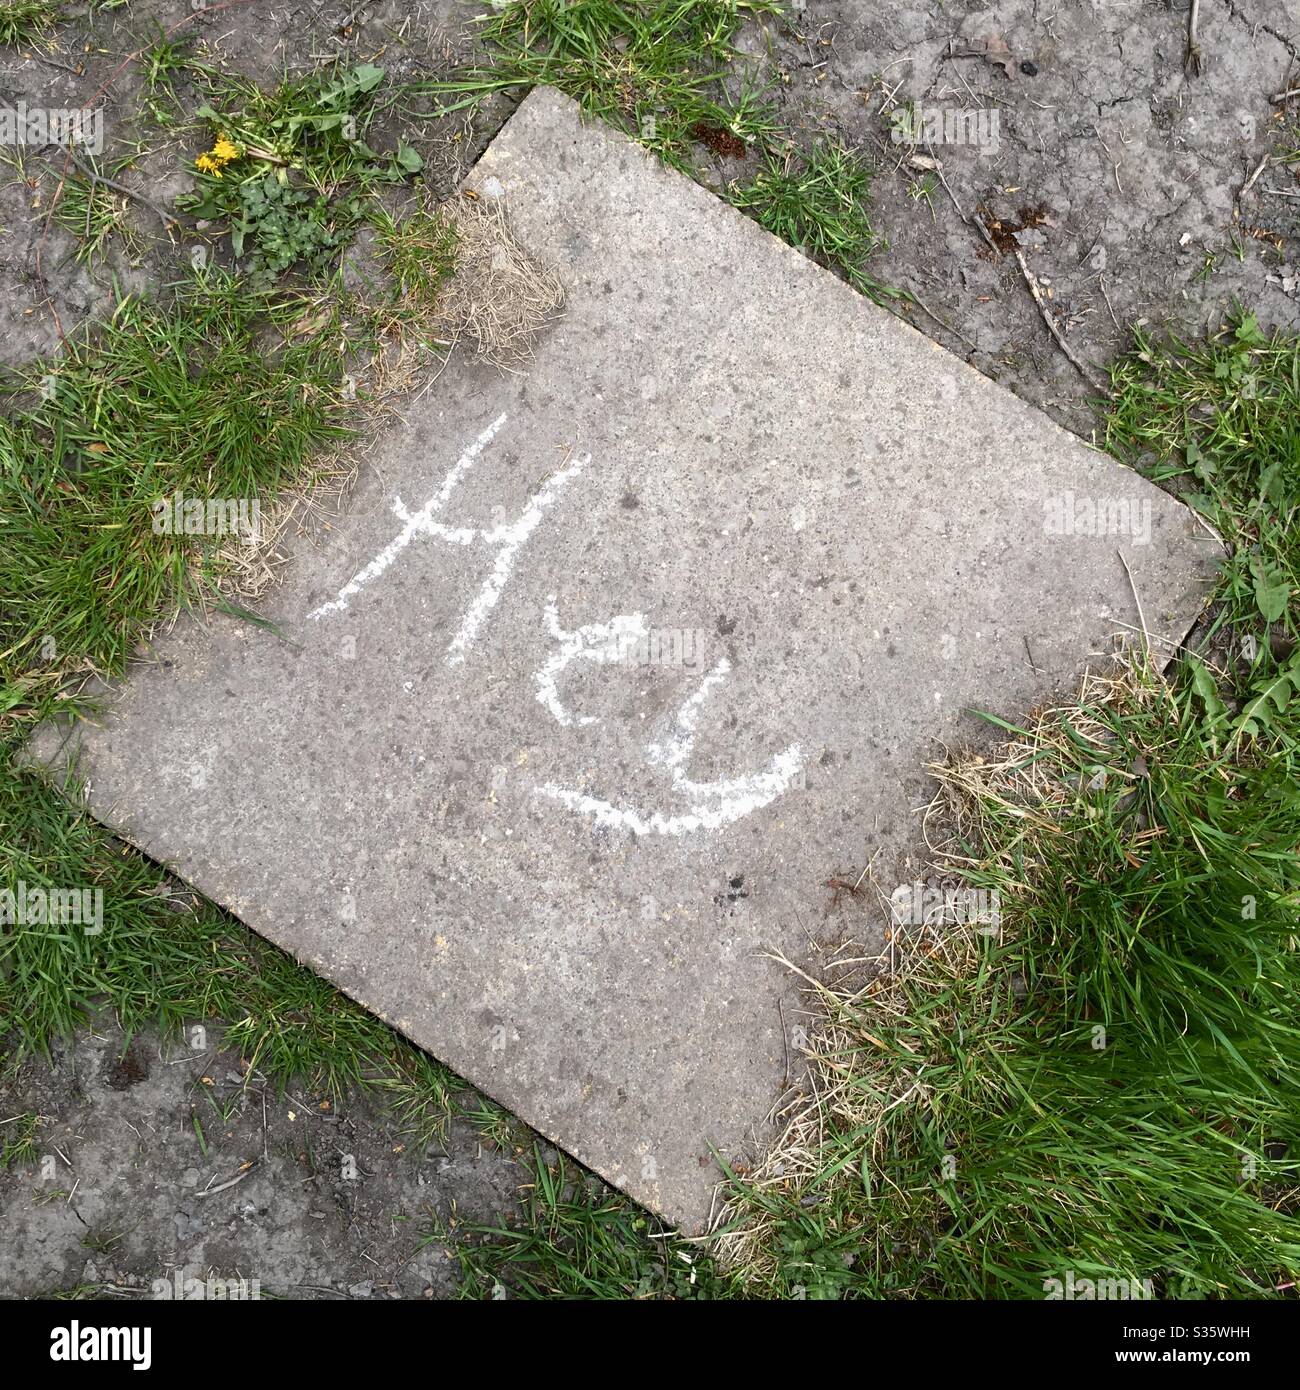 A photo looking down at a paving slab with the word ‘hey’ written on it in white chalk. Paving stone on a rural path with grass clumps. Fun communication in the time of isolation. Stock Photo